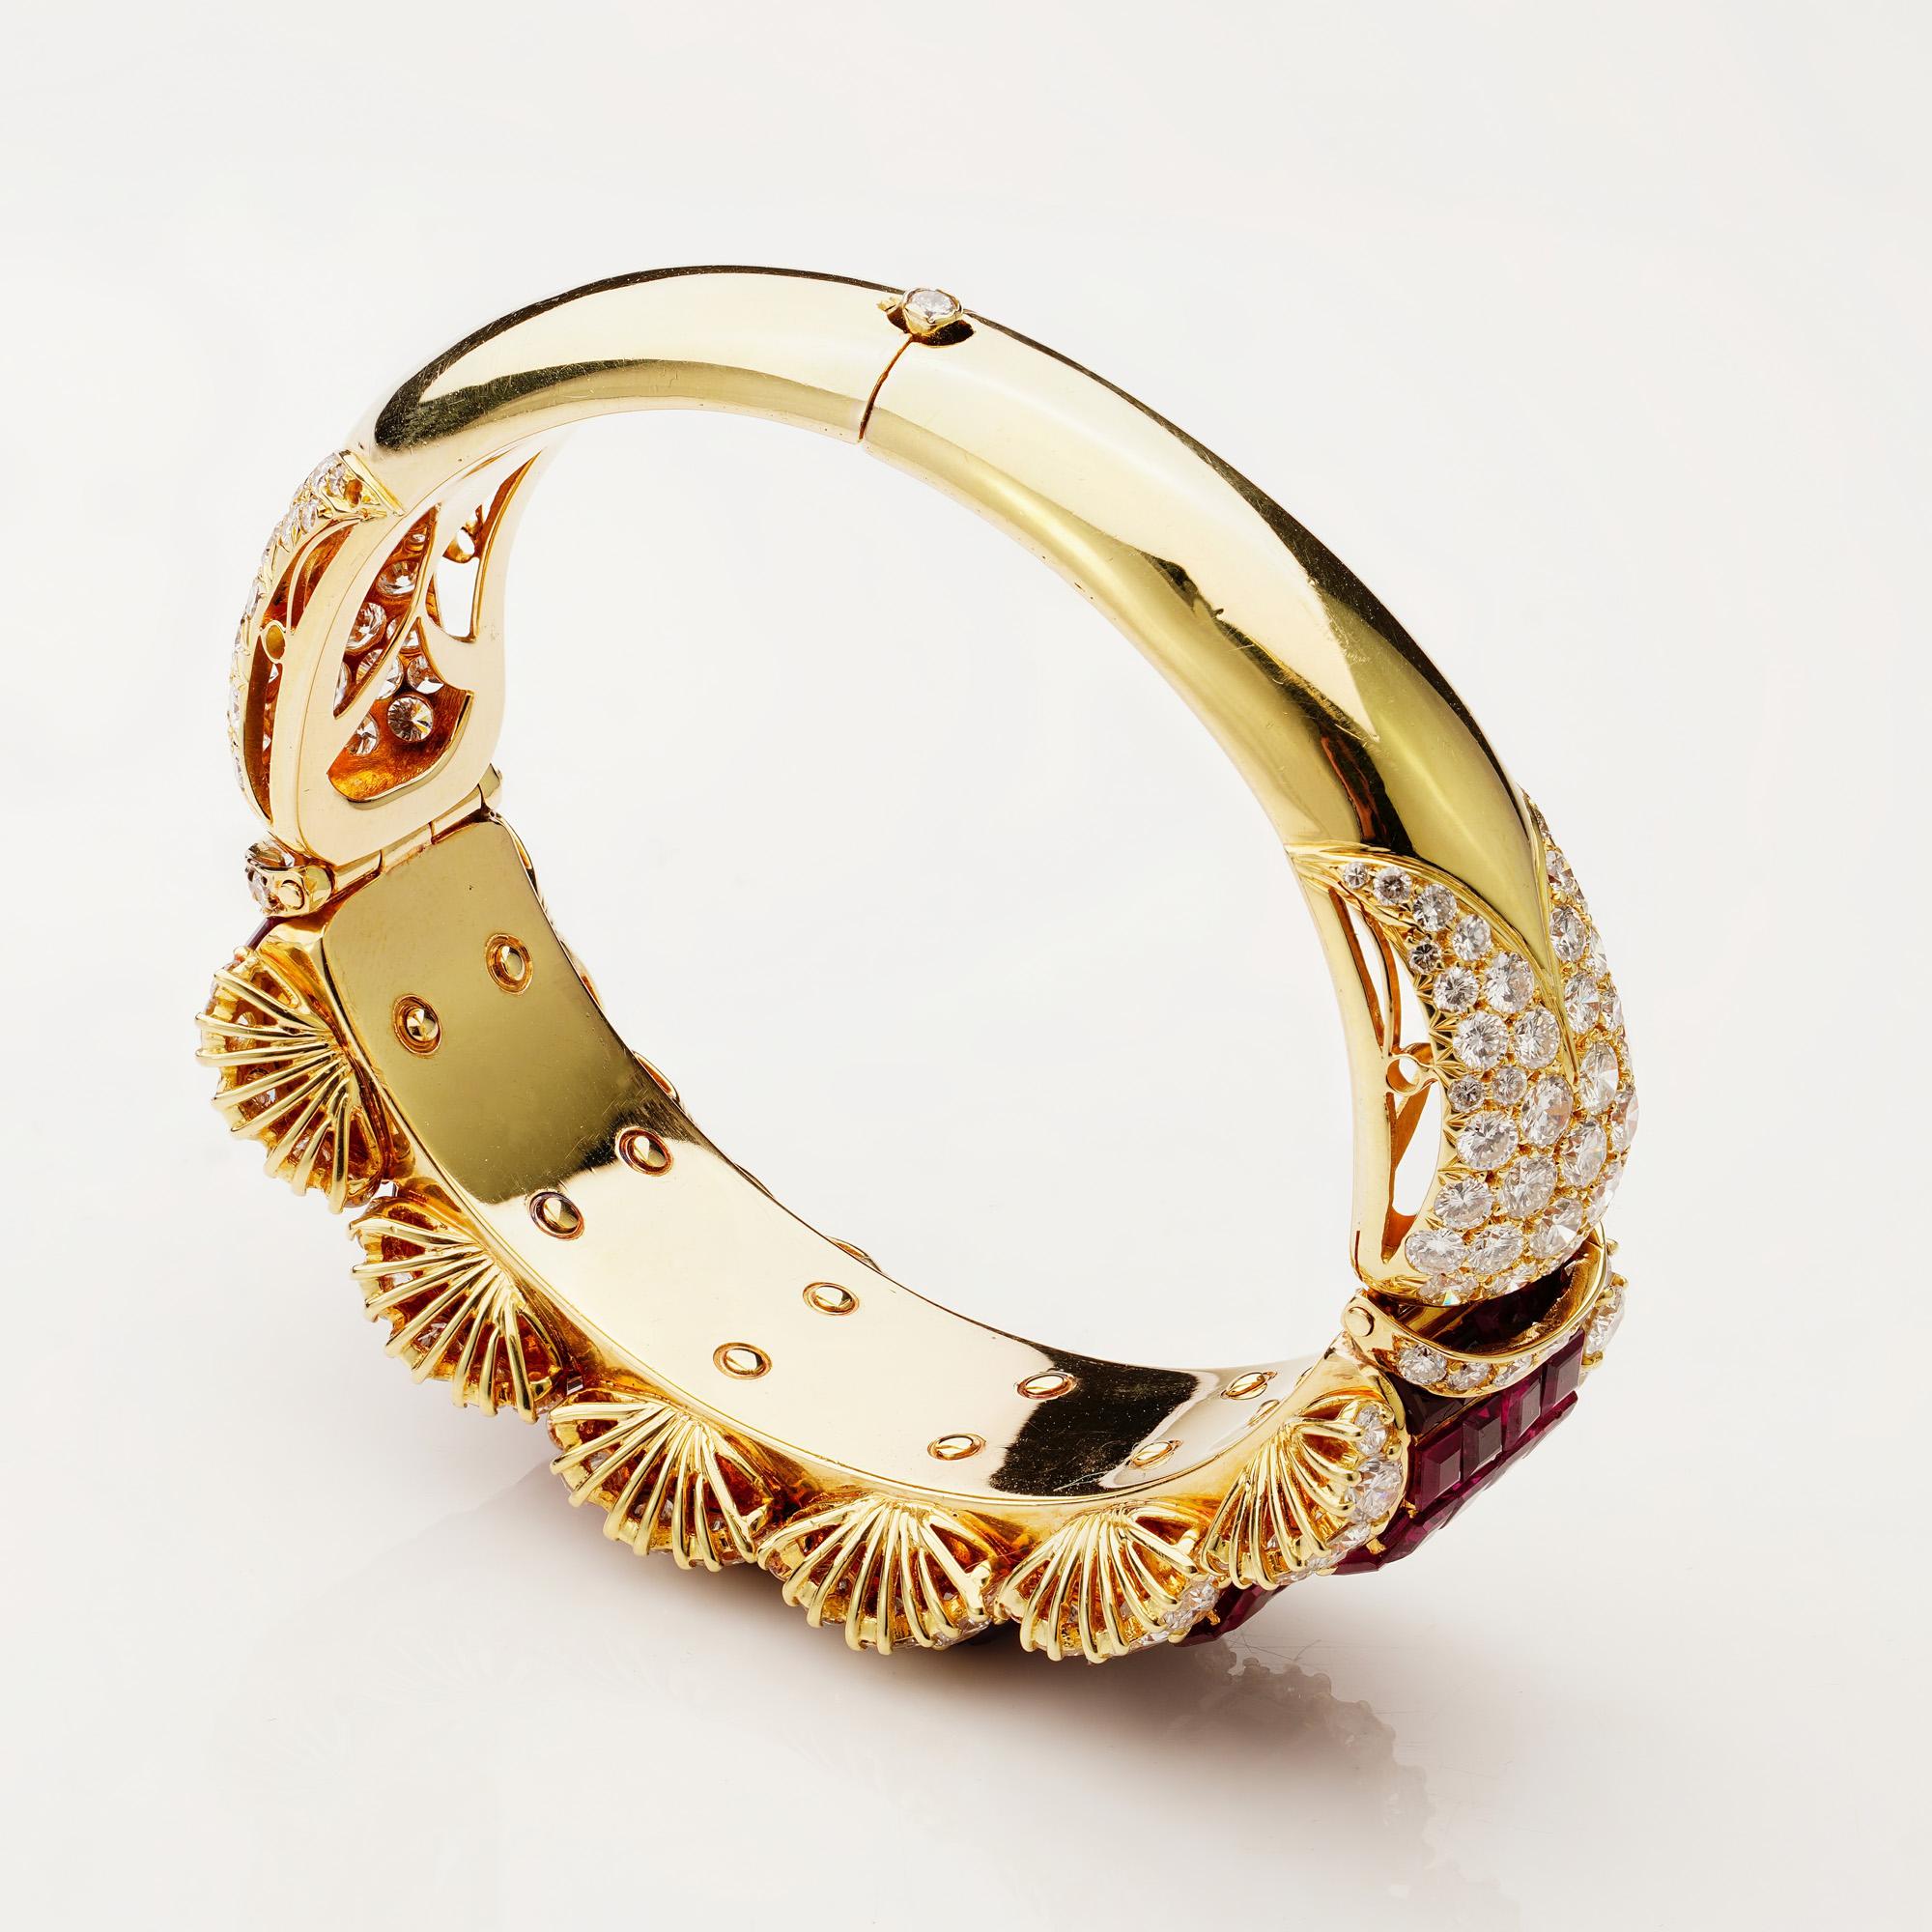 Square Cut 14kt. Yellow Gold Bangle Set with 18 Ct. Rubies and 12.84 Ct. Diamonds For Sale